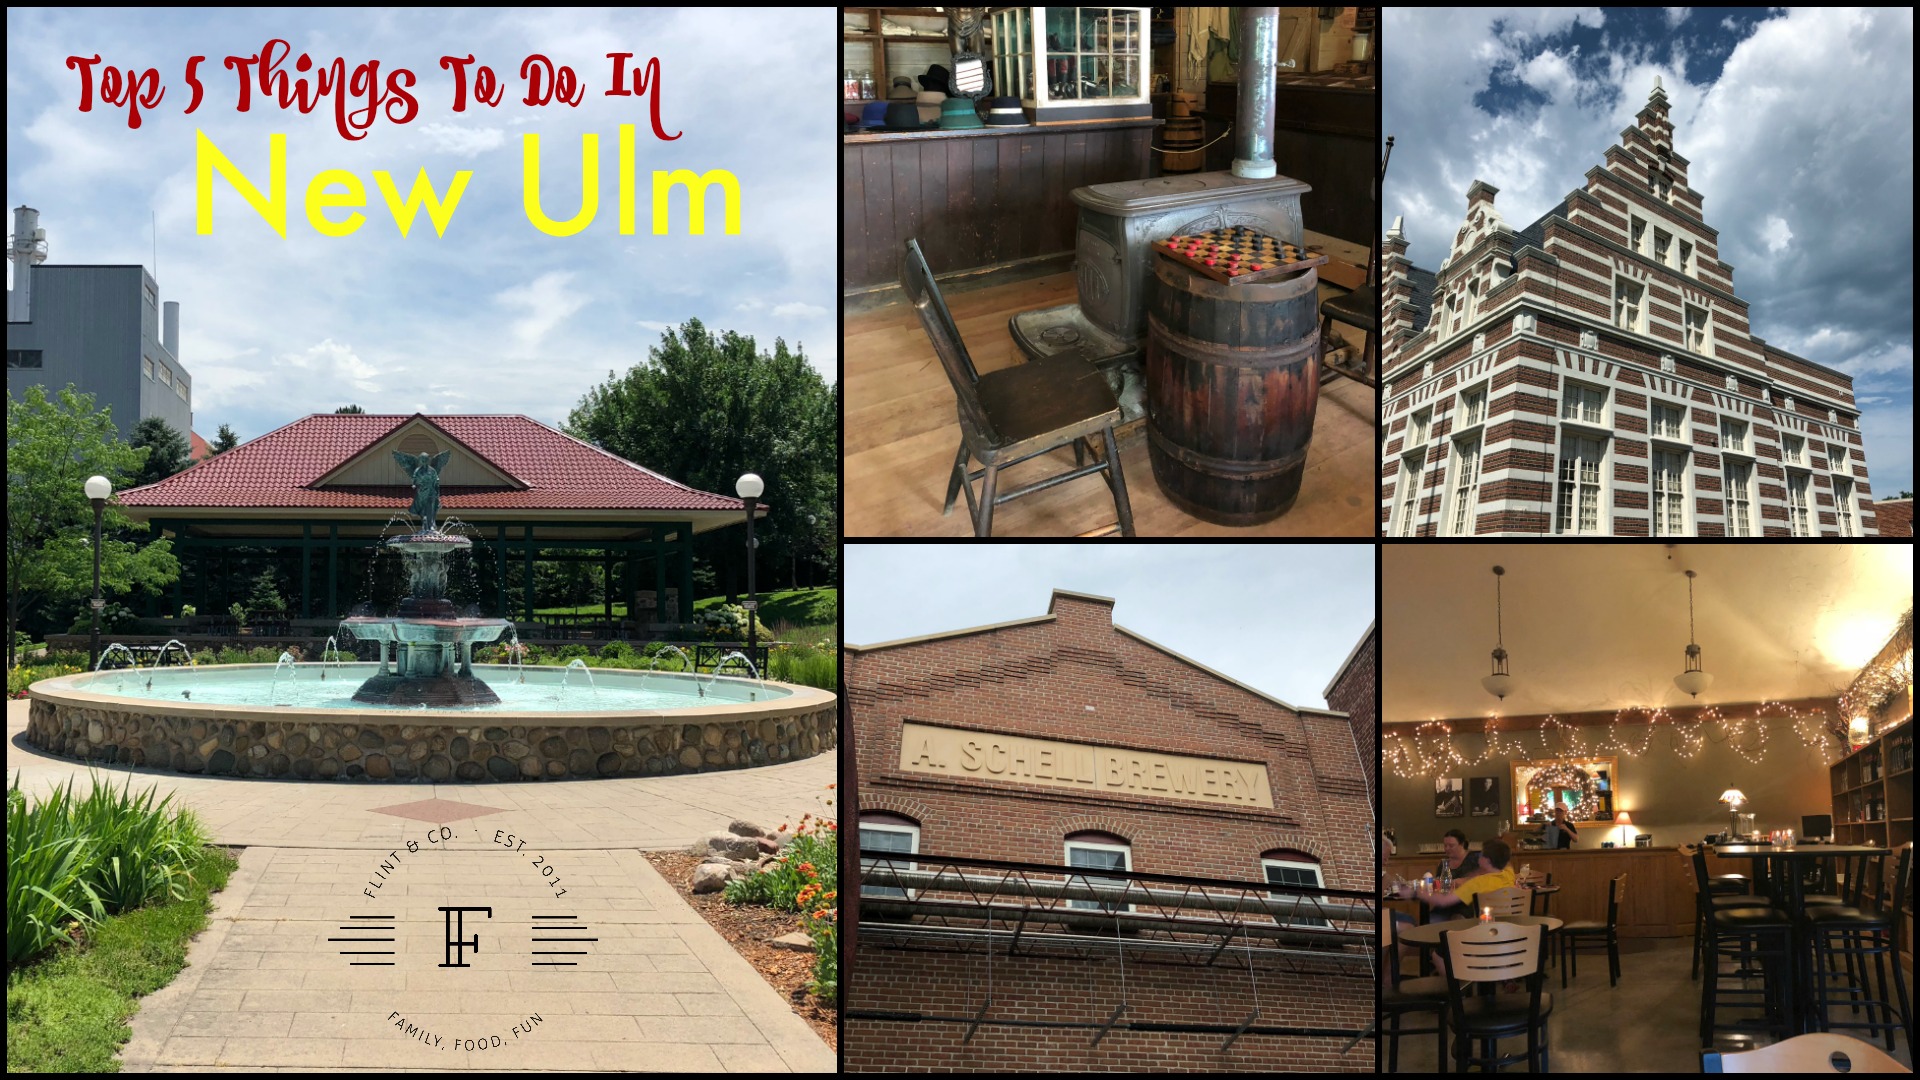 the-top-5-things-to-do-in-new-ulm-minnesota-a-weekend-getaway